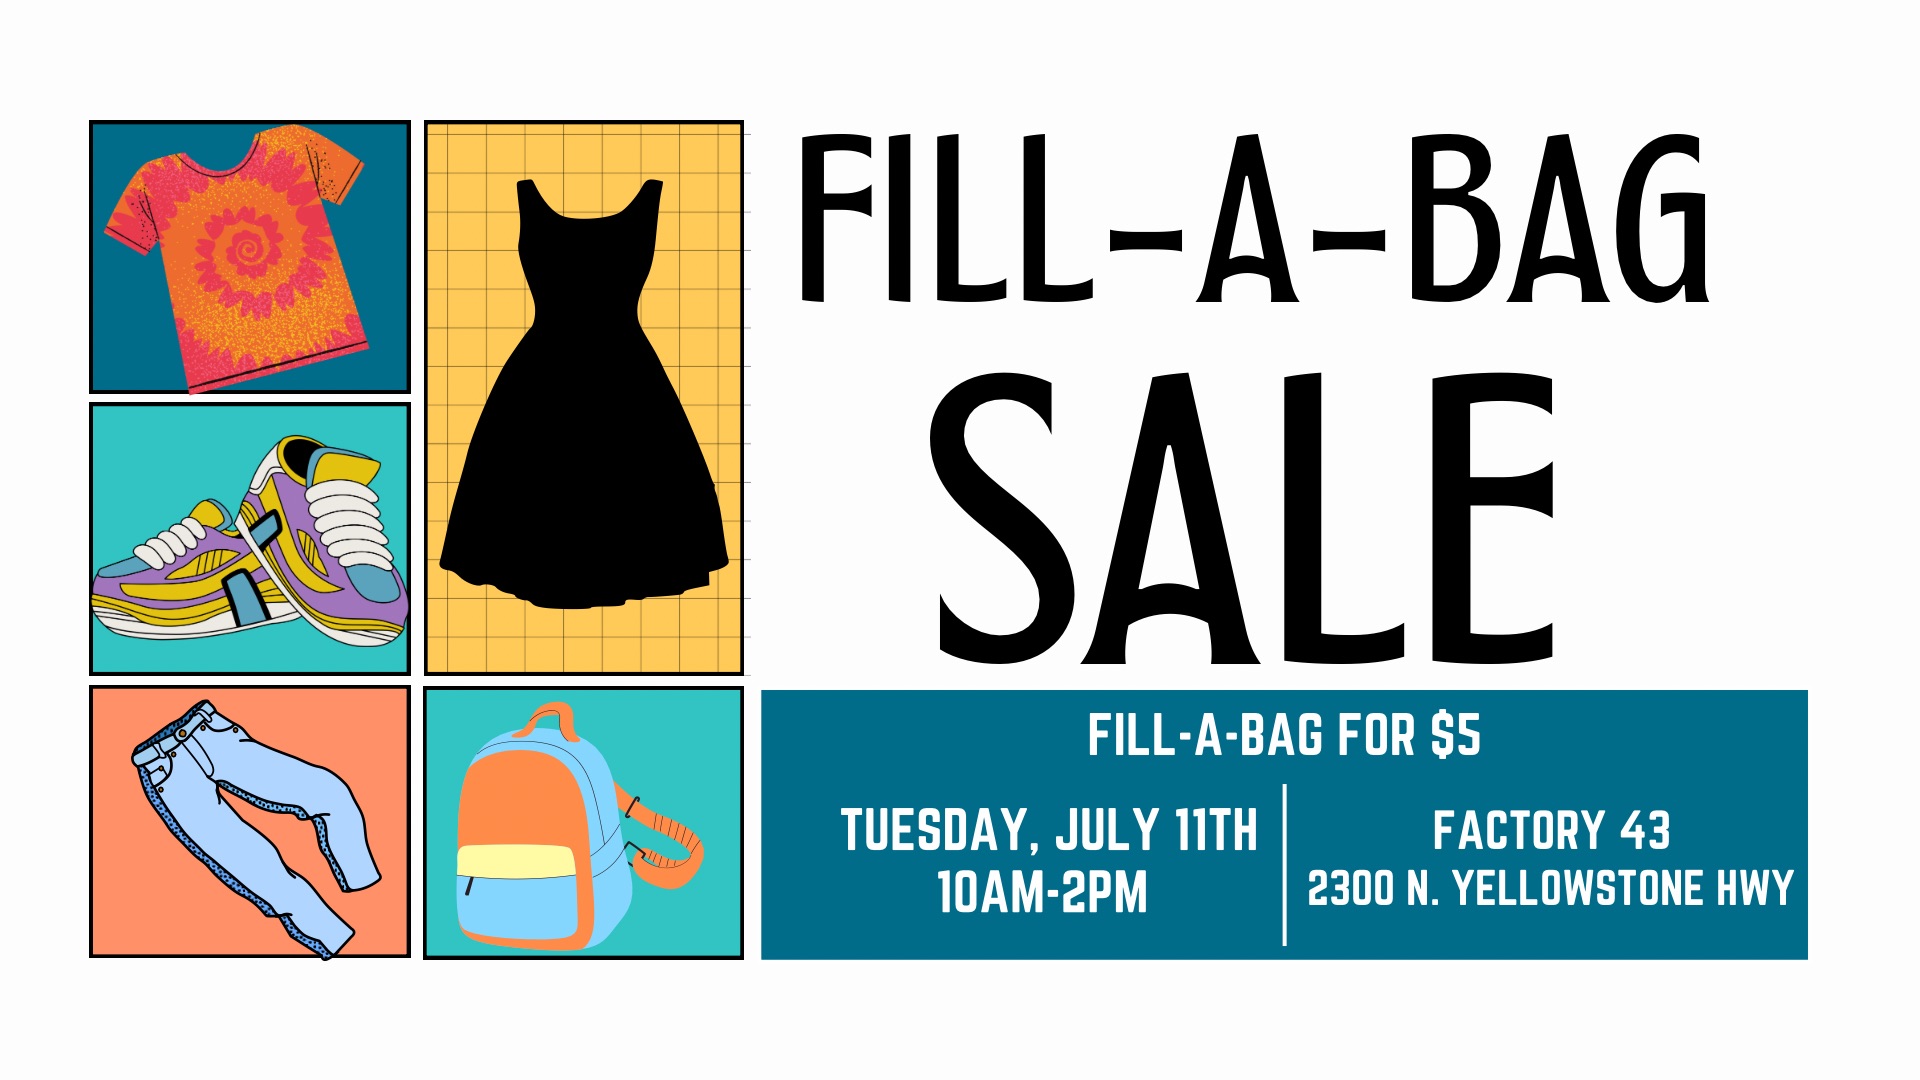 FillABag Sale and Charity Fundraiser Riverbend Communications